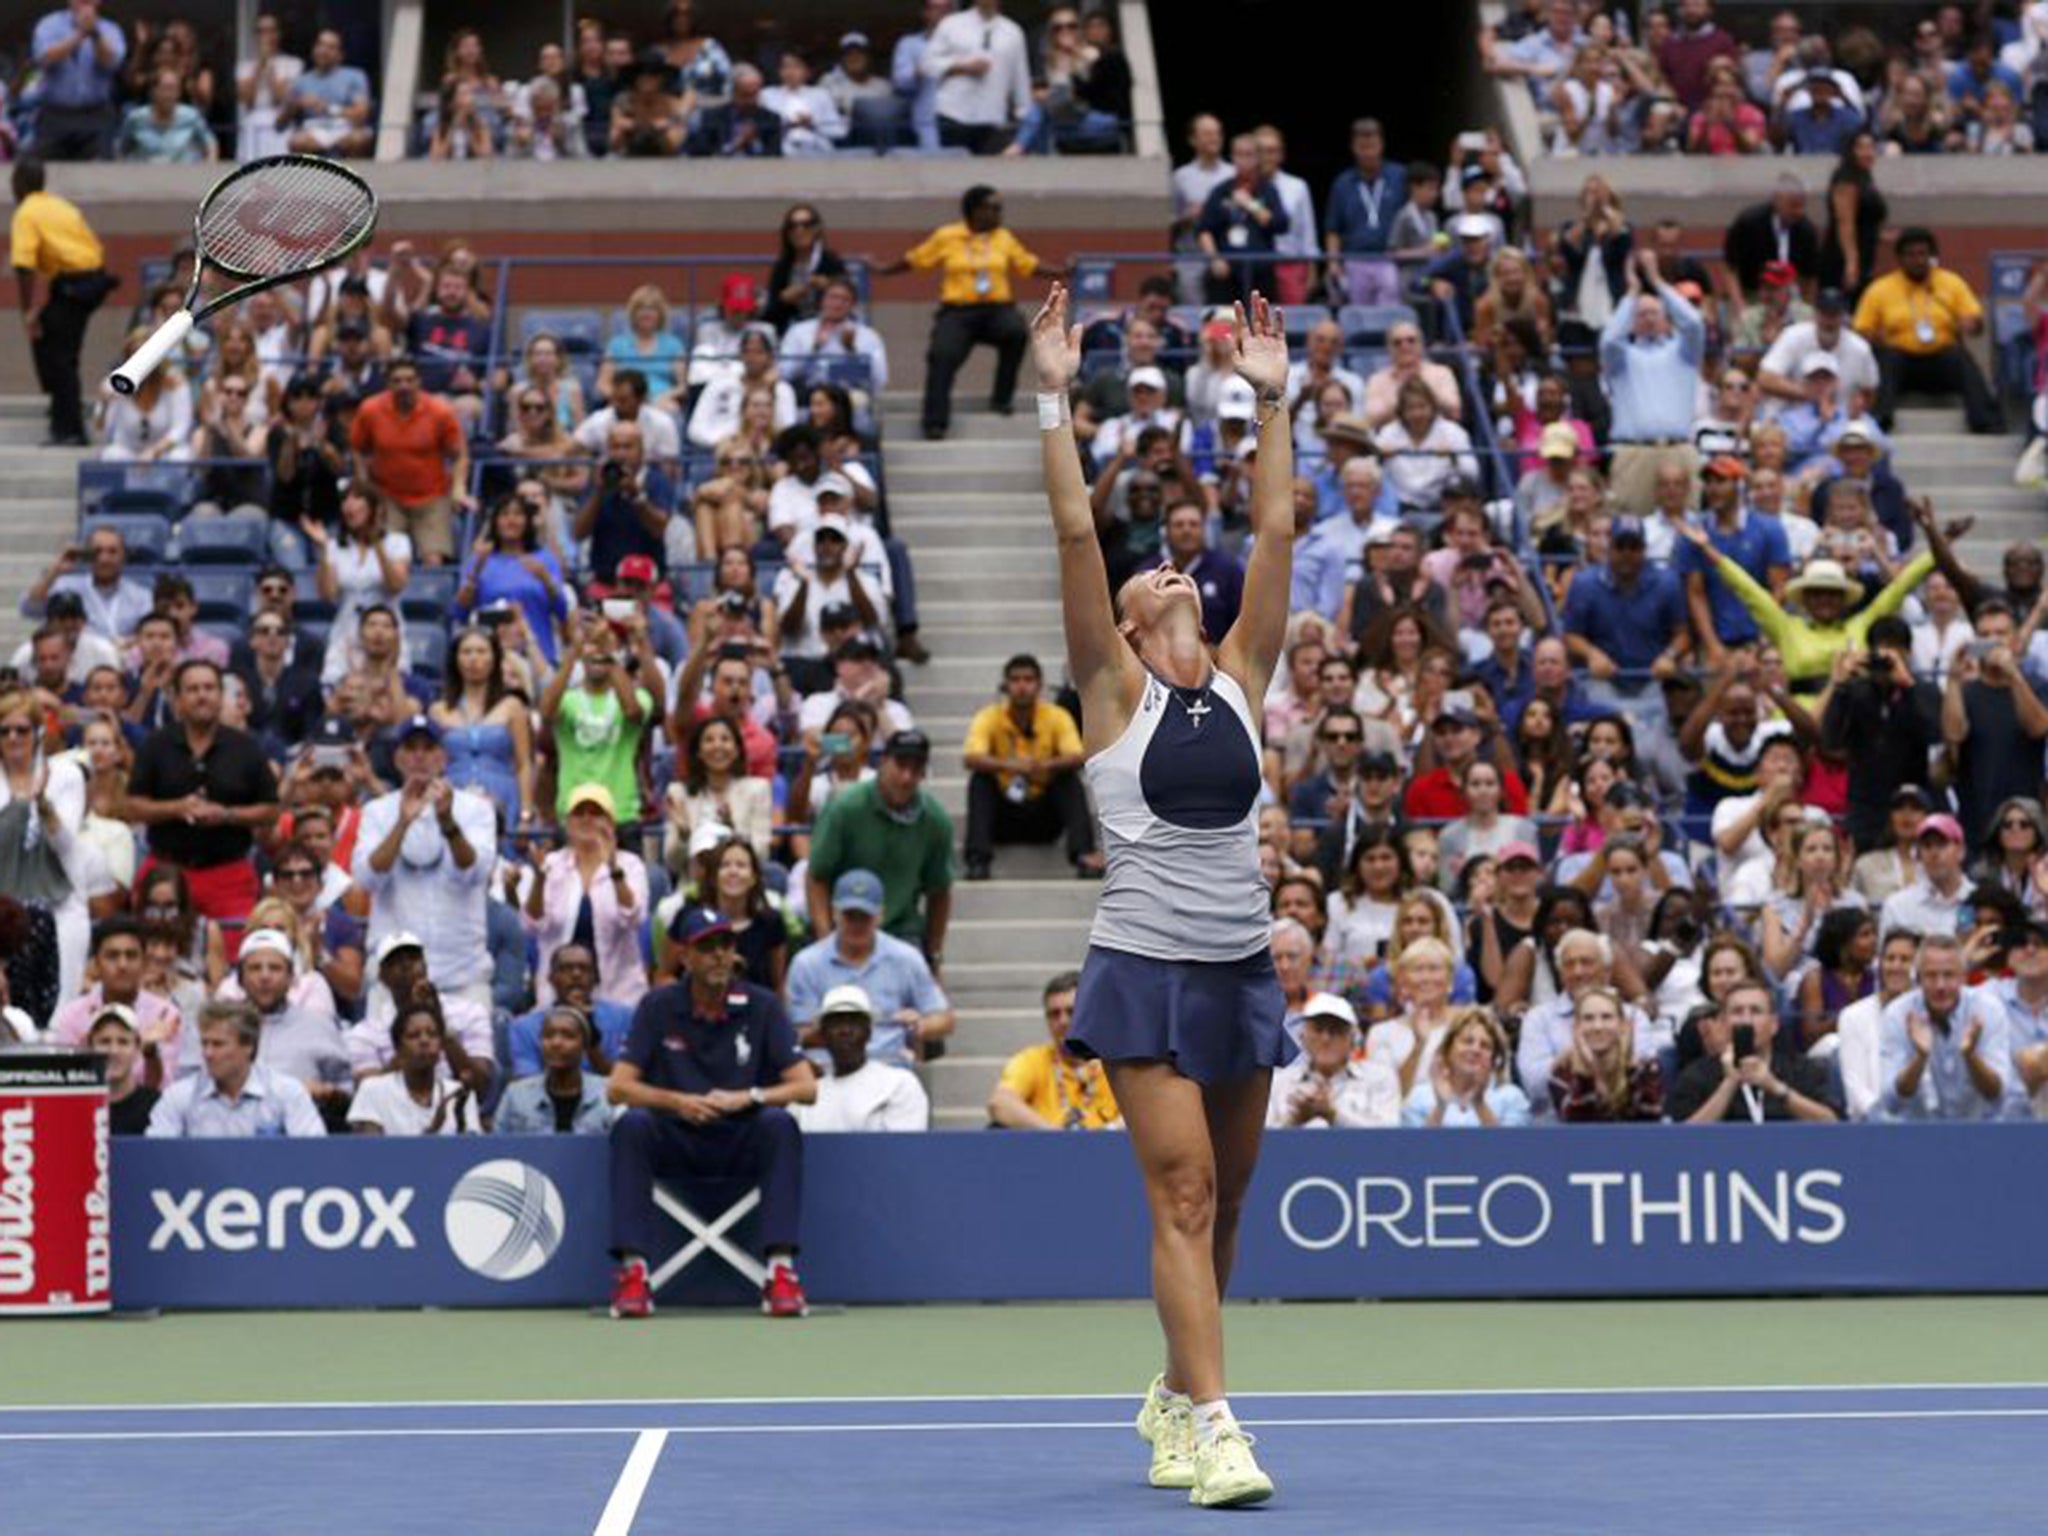 Flavia Pennetta celebrates after defeating her compatriot Roberta Vinci in the final of the women's singles at the U.S. Open